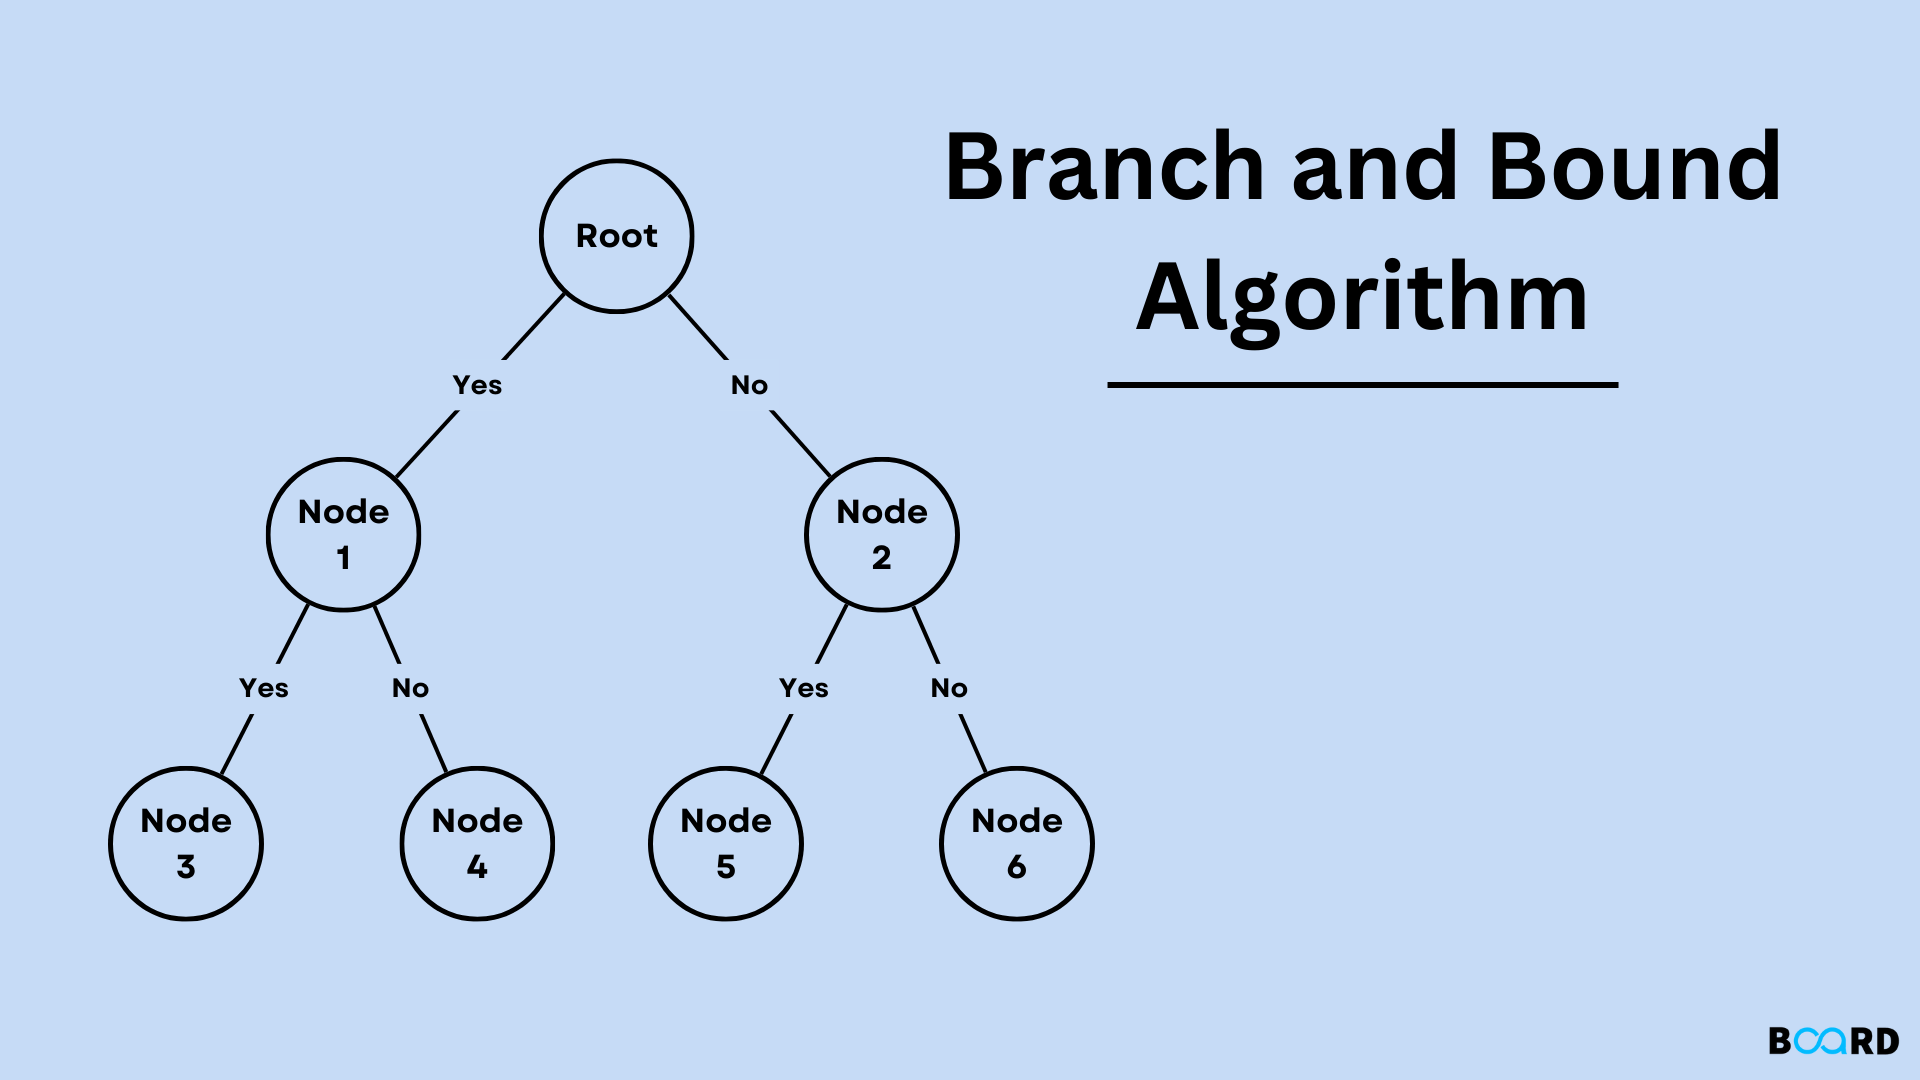 branch and bound is a problem solving technique